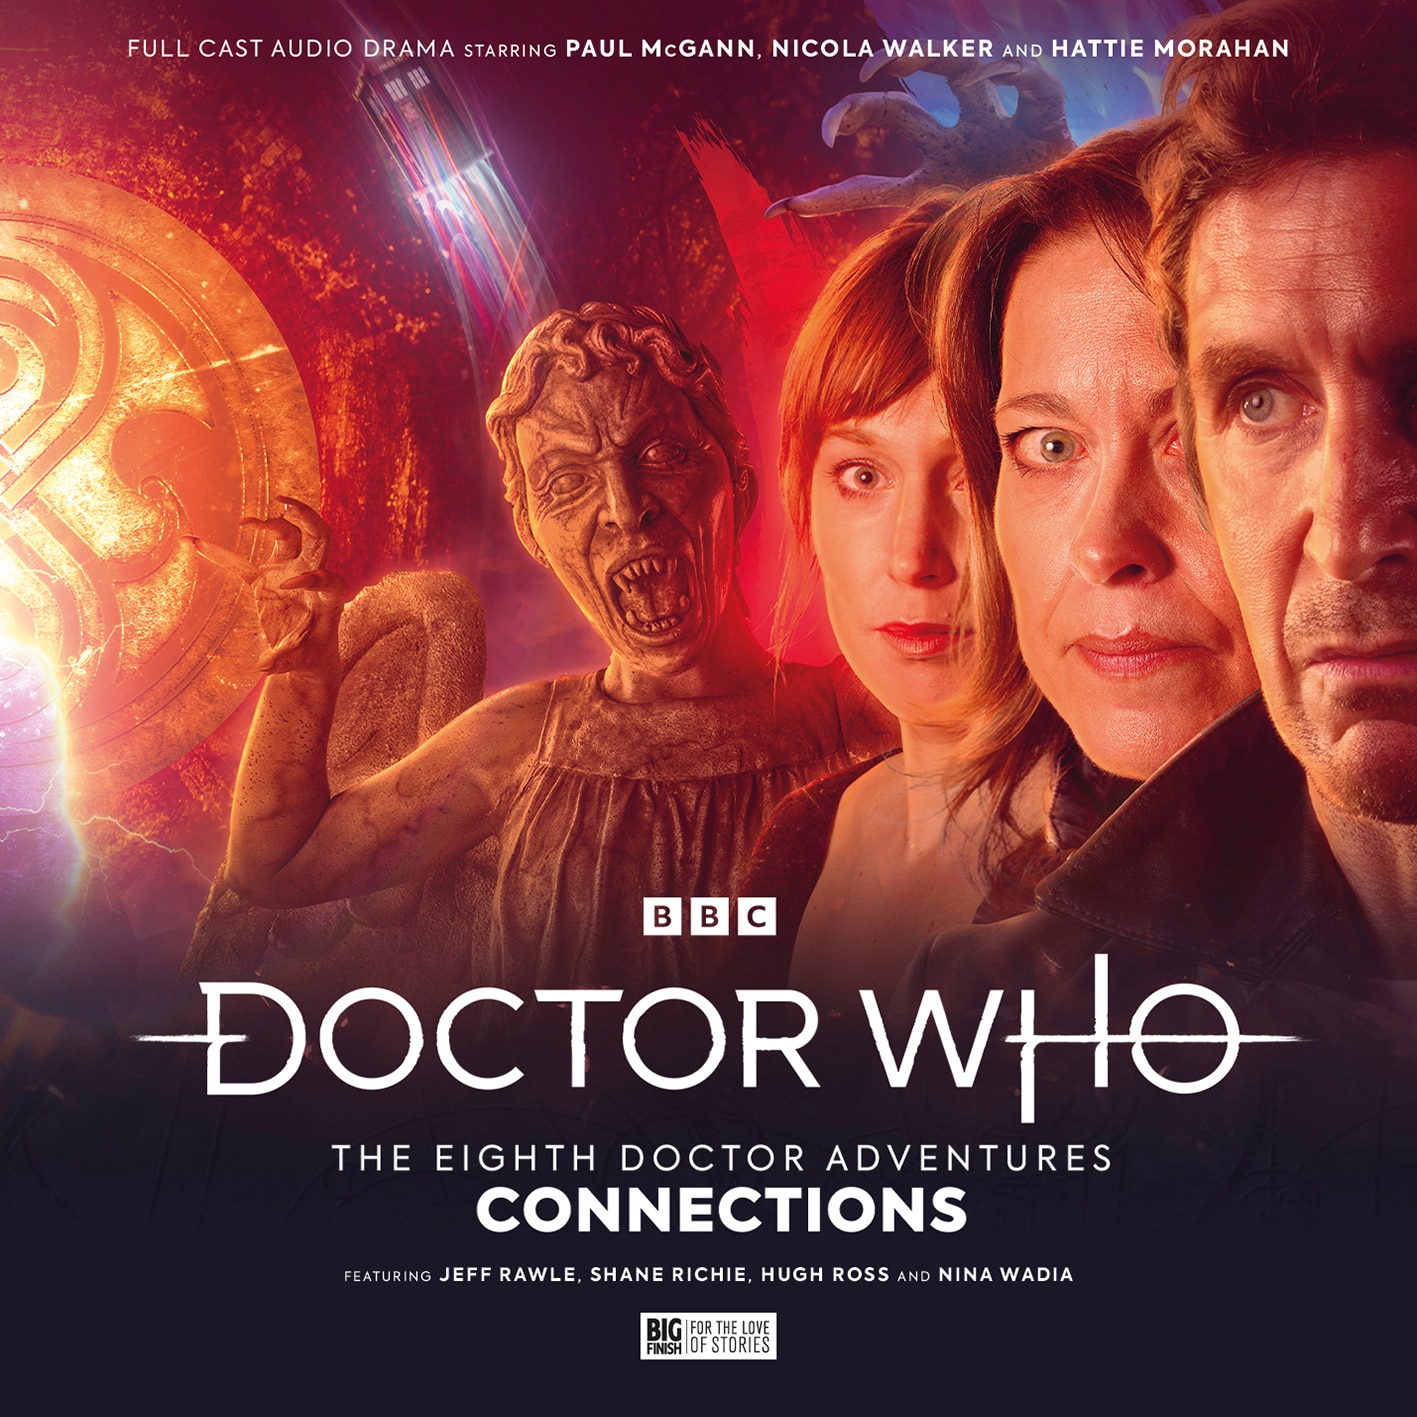 The Eighth Doctor Adventures - Connections